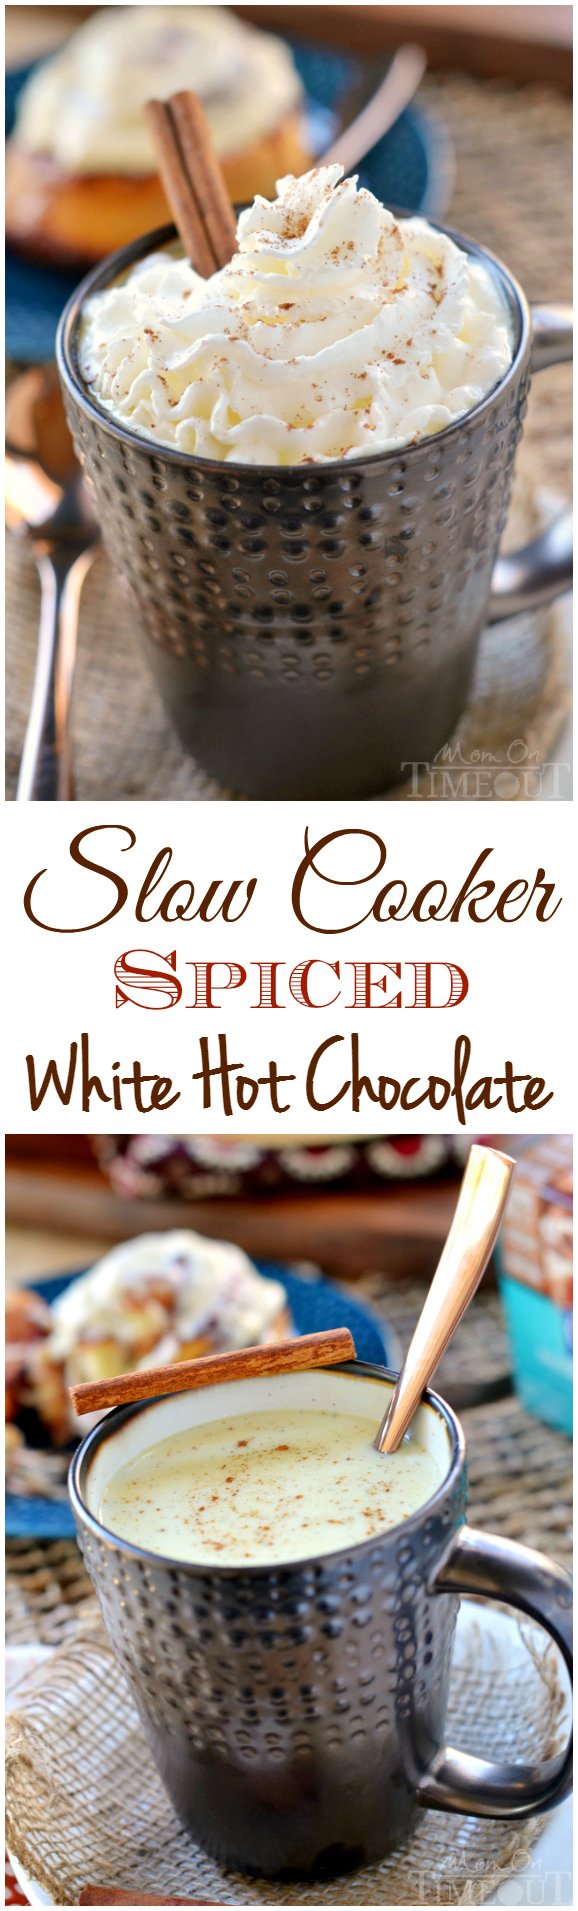 The incredible flavors of cinnamon, nutmeg, and cardamom spice up this wonderfully creamy and rich Slow Cooker Spiced White Hot Chocolate. | MomOnTimeout.com | #beverage #chocolate #hot #crock #pot #ad